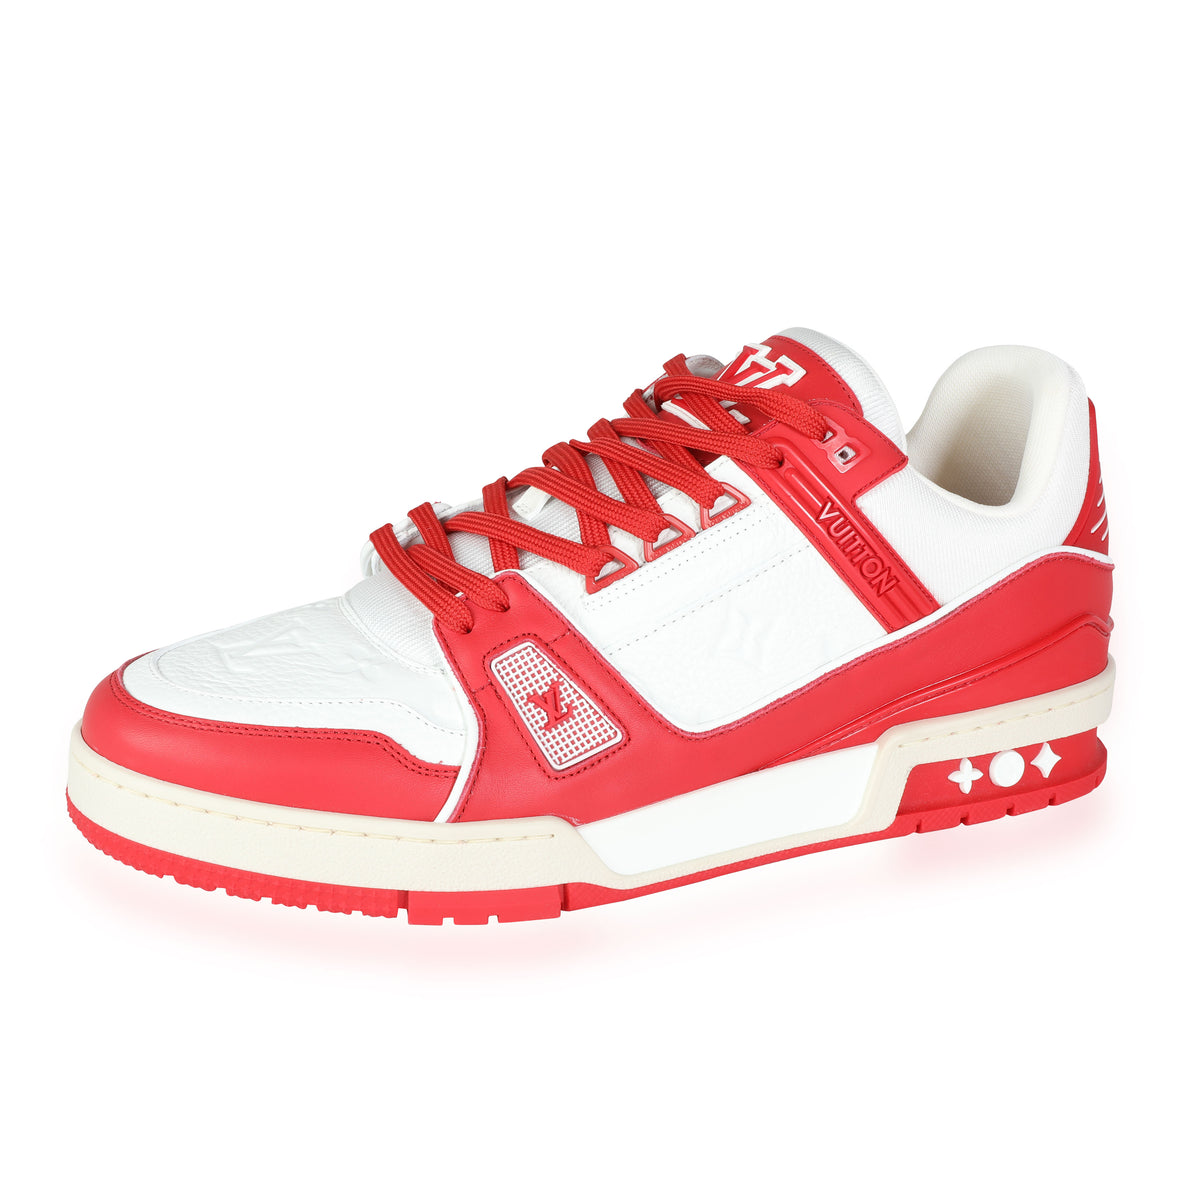 Louis Vuitton - Product (RED) x Louis Vuitton Trainer 'Red' (9 UK), myGemma, CH